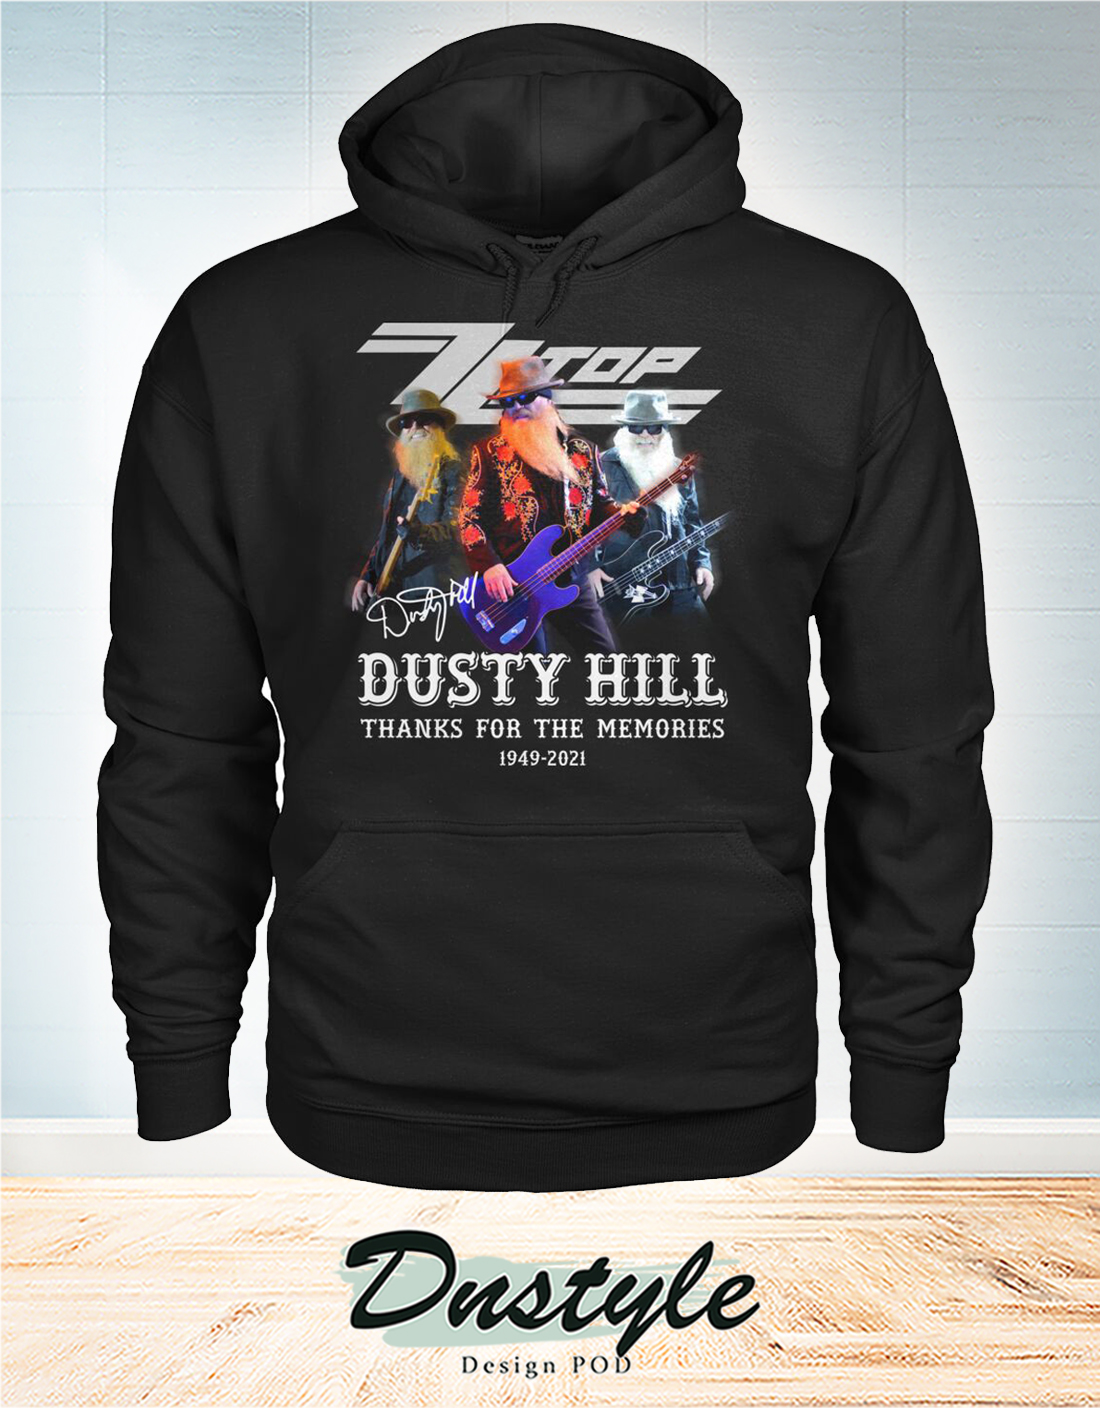 Zz Top Dusty Hill thanks for the memories signature hoodie